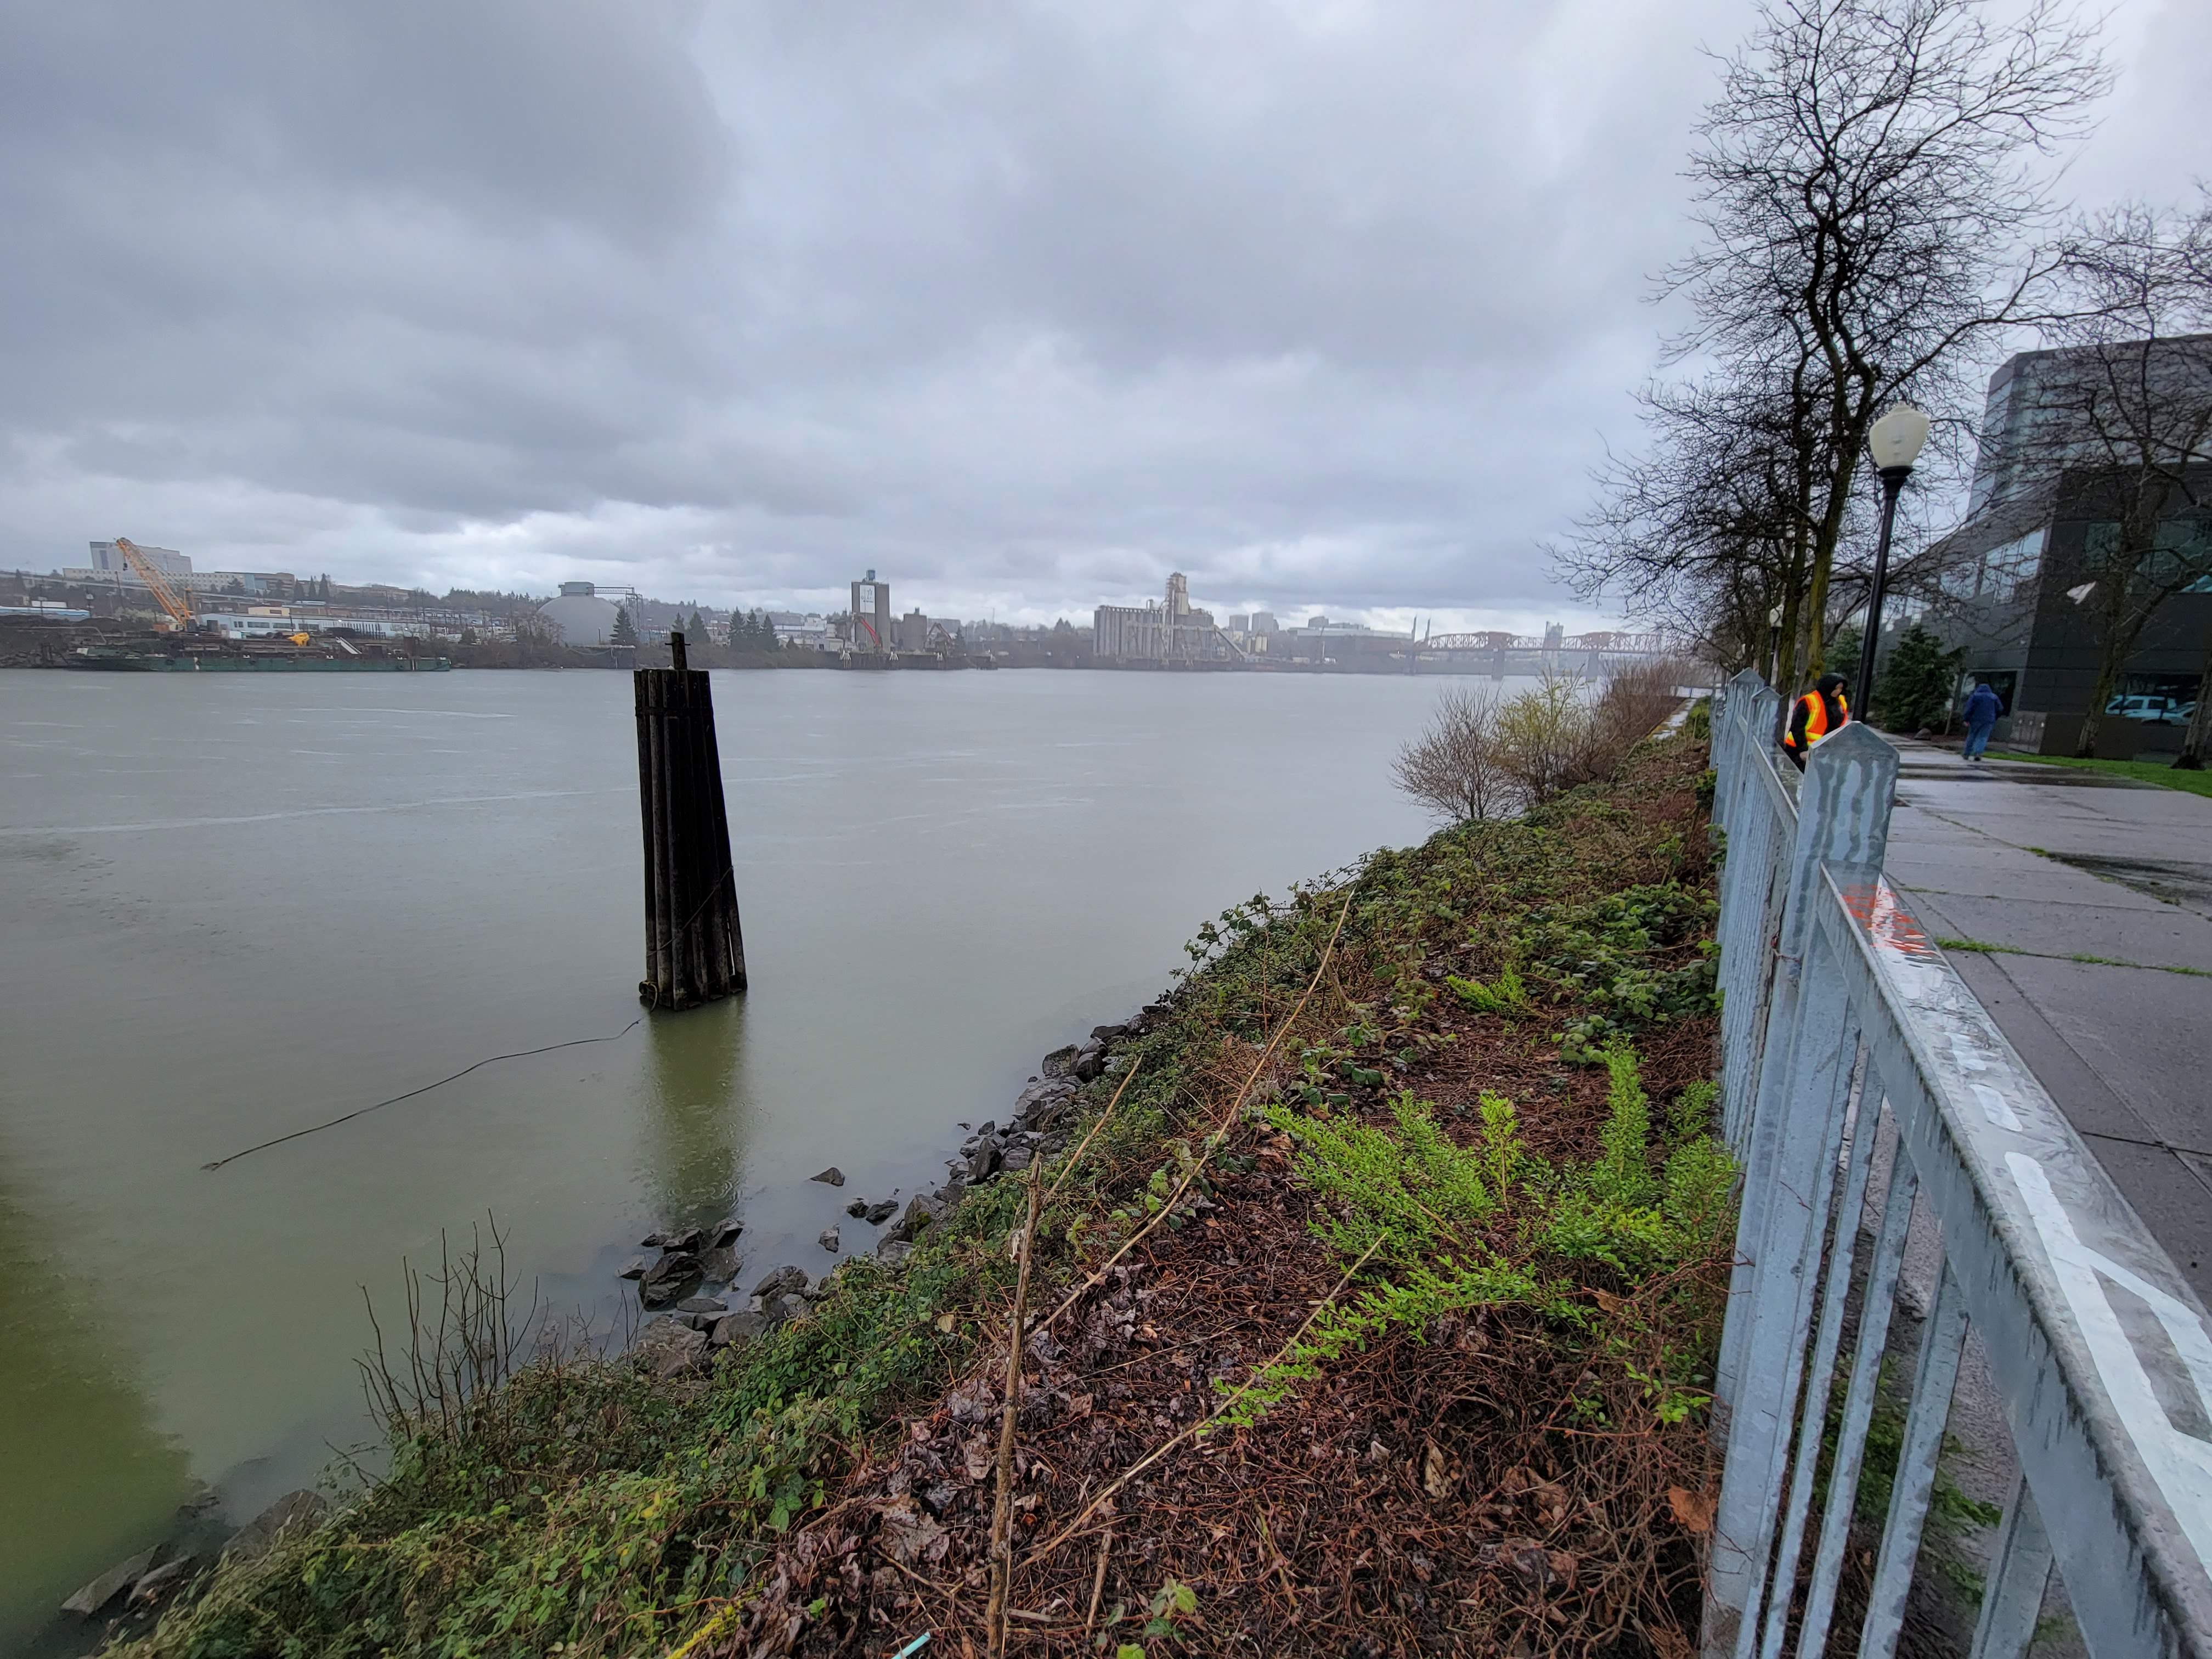 View of the Willamette River during a rainstorm from beneath the Fremont Bridge.